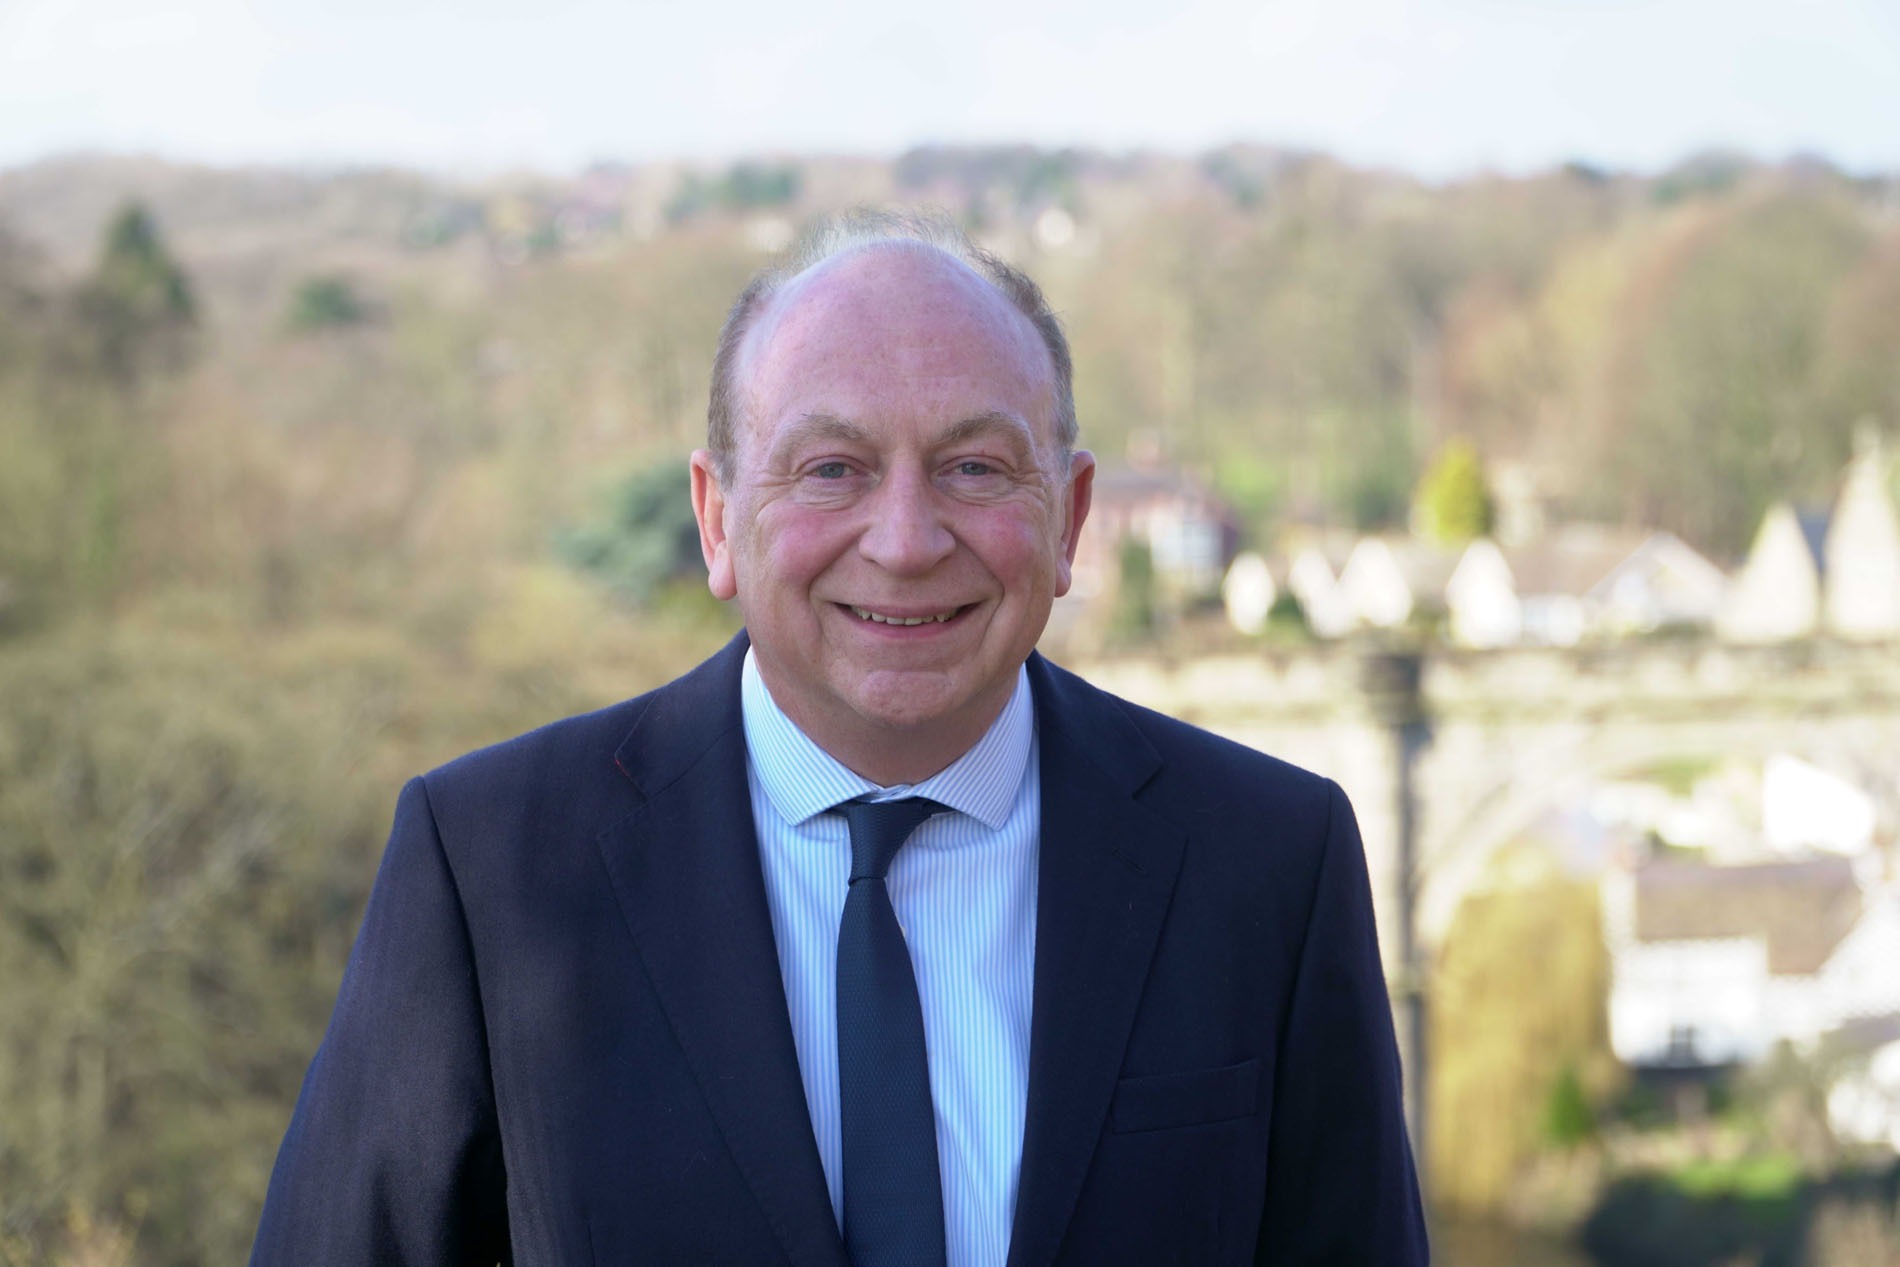 Philip Allott, Police Fire and Crime Conservative candidate for North Yorkshire